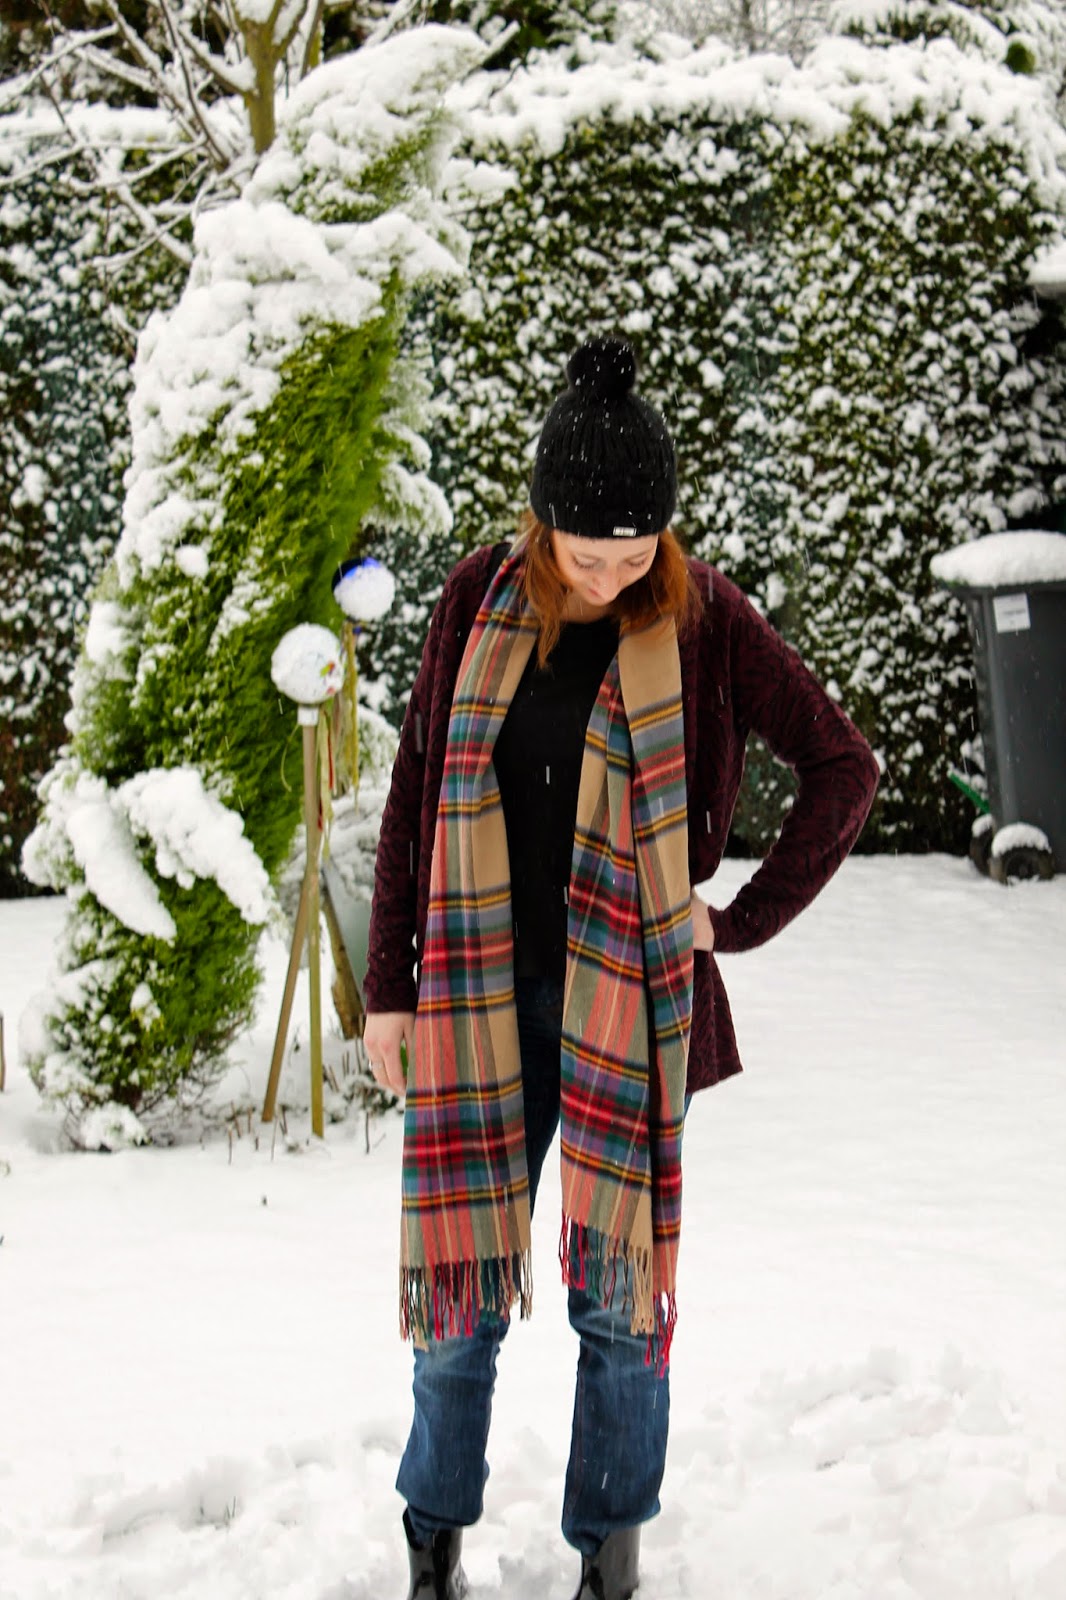 Outfit of the day | Winter Wonderland